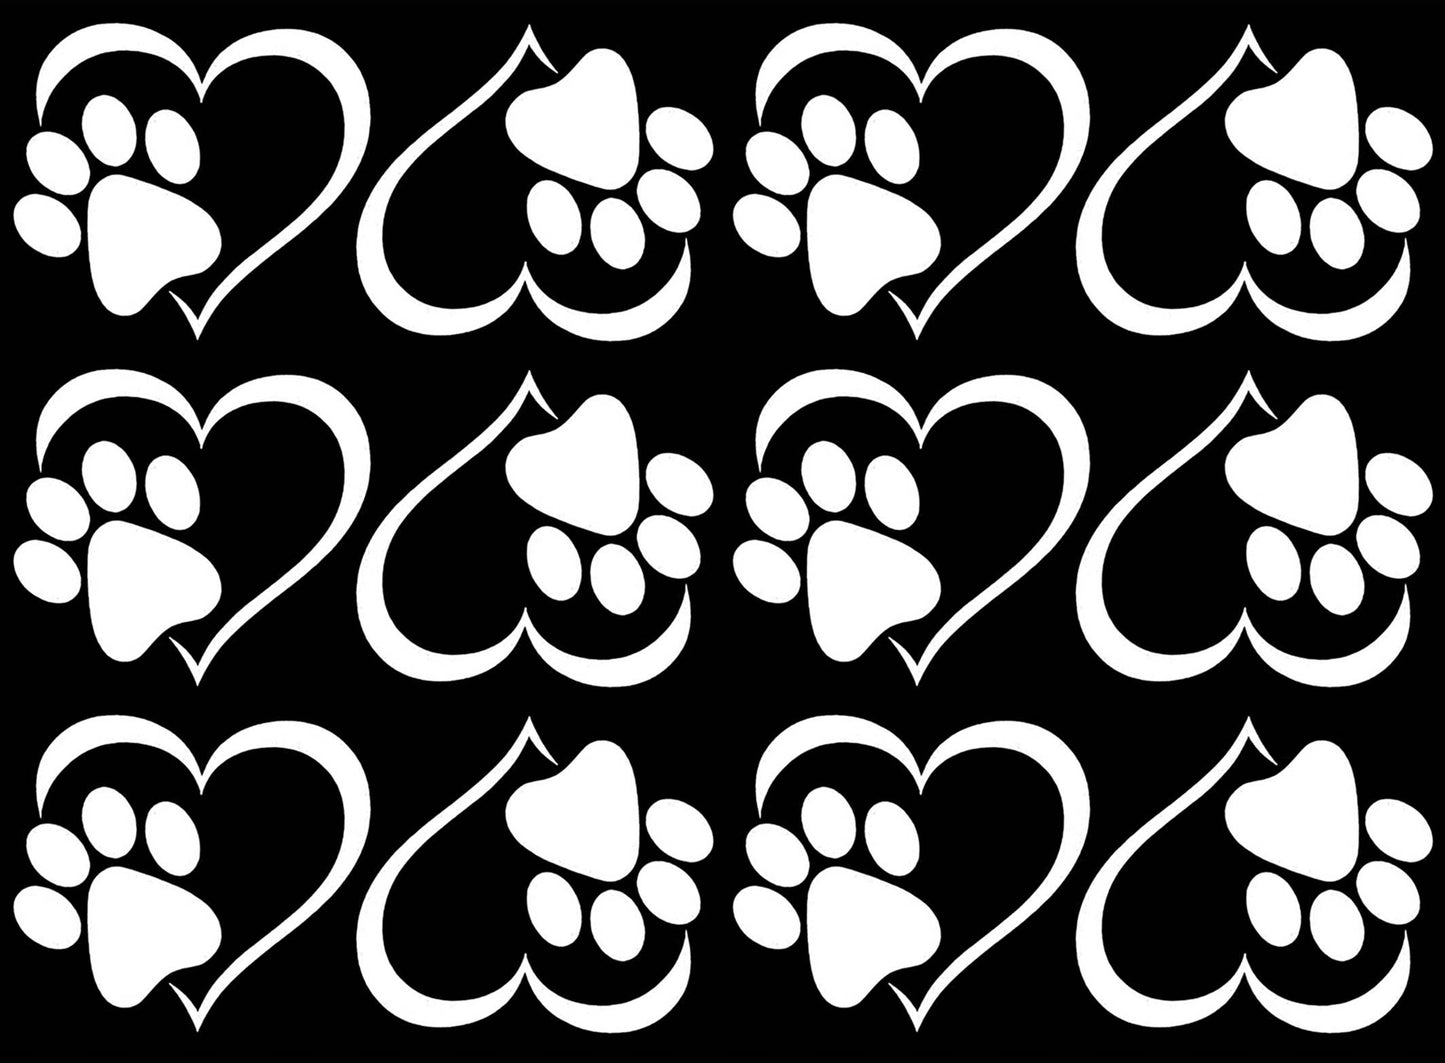 Heart Paw Print 12 pcs 1-3/4" White Fused Glass Decals